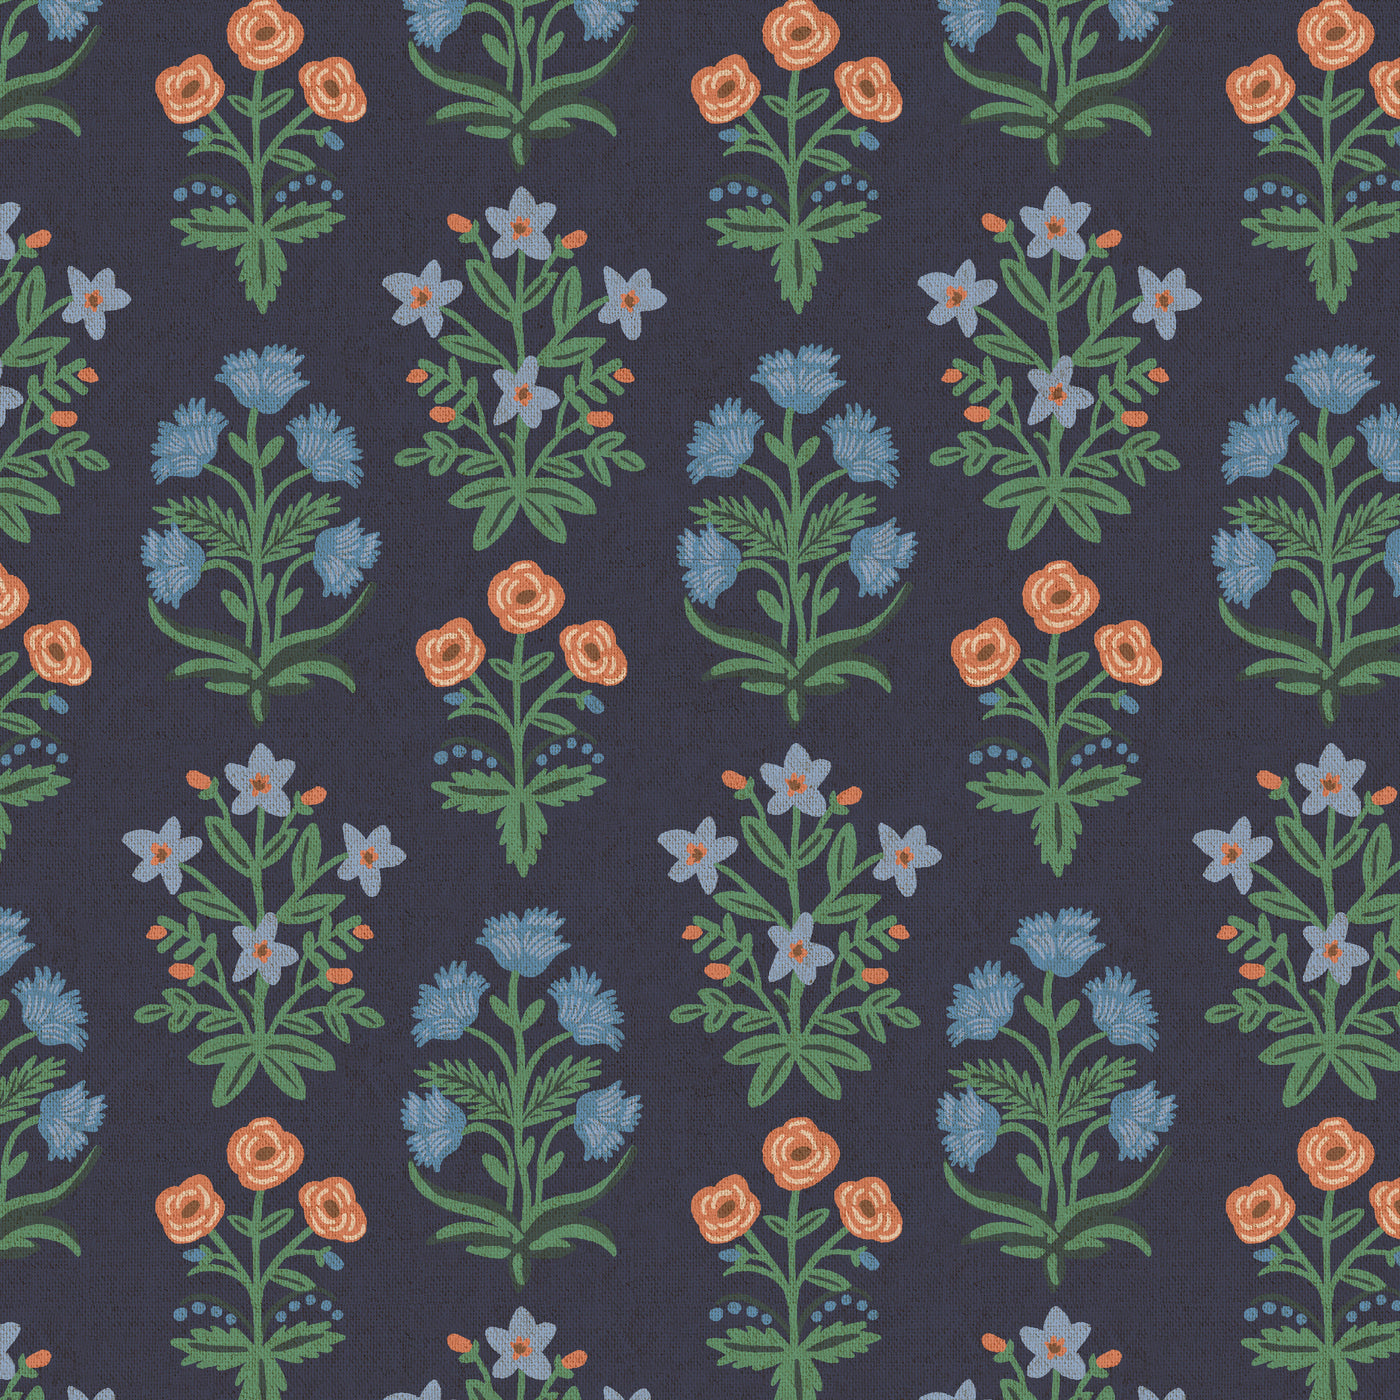 1 YARD CUT - Rifle Paper Co - Camont - Mughal Rose Canvas - Navy